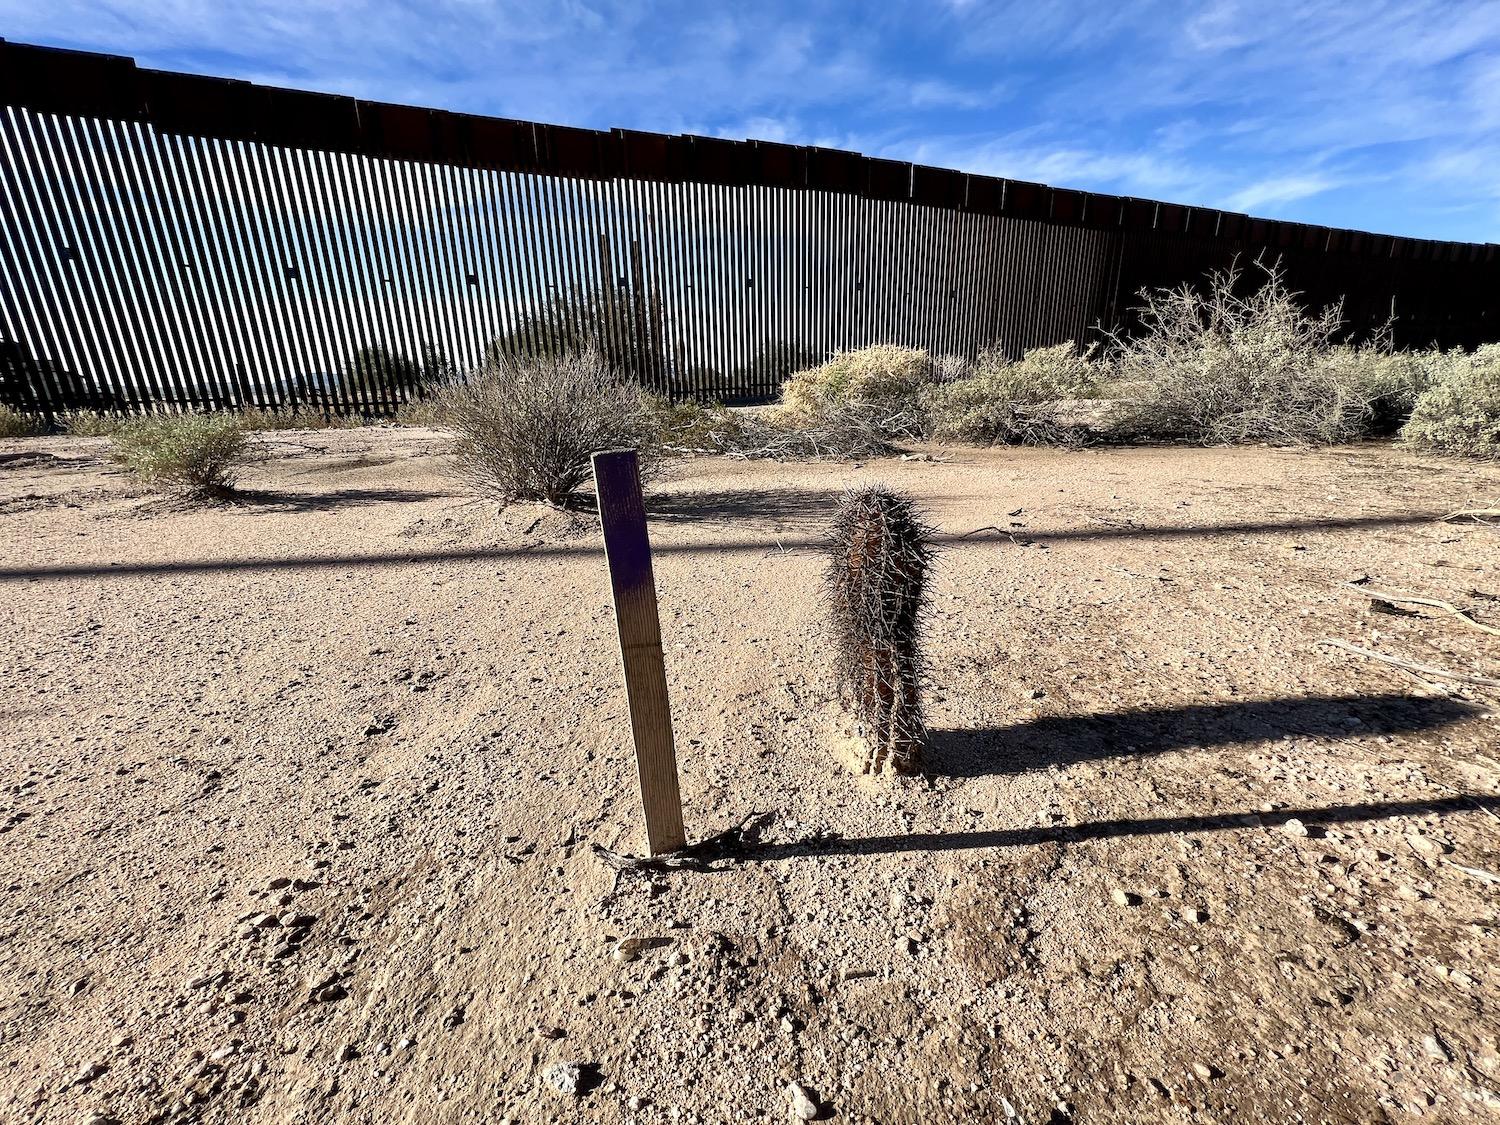 A wooden marker stands beside an ailing cactus that was relocated when the border wall was built.